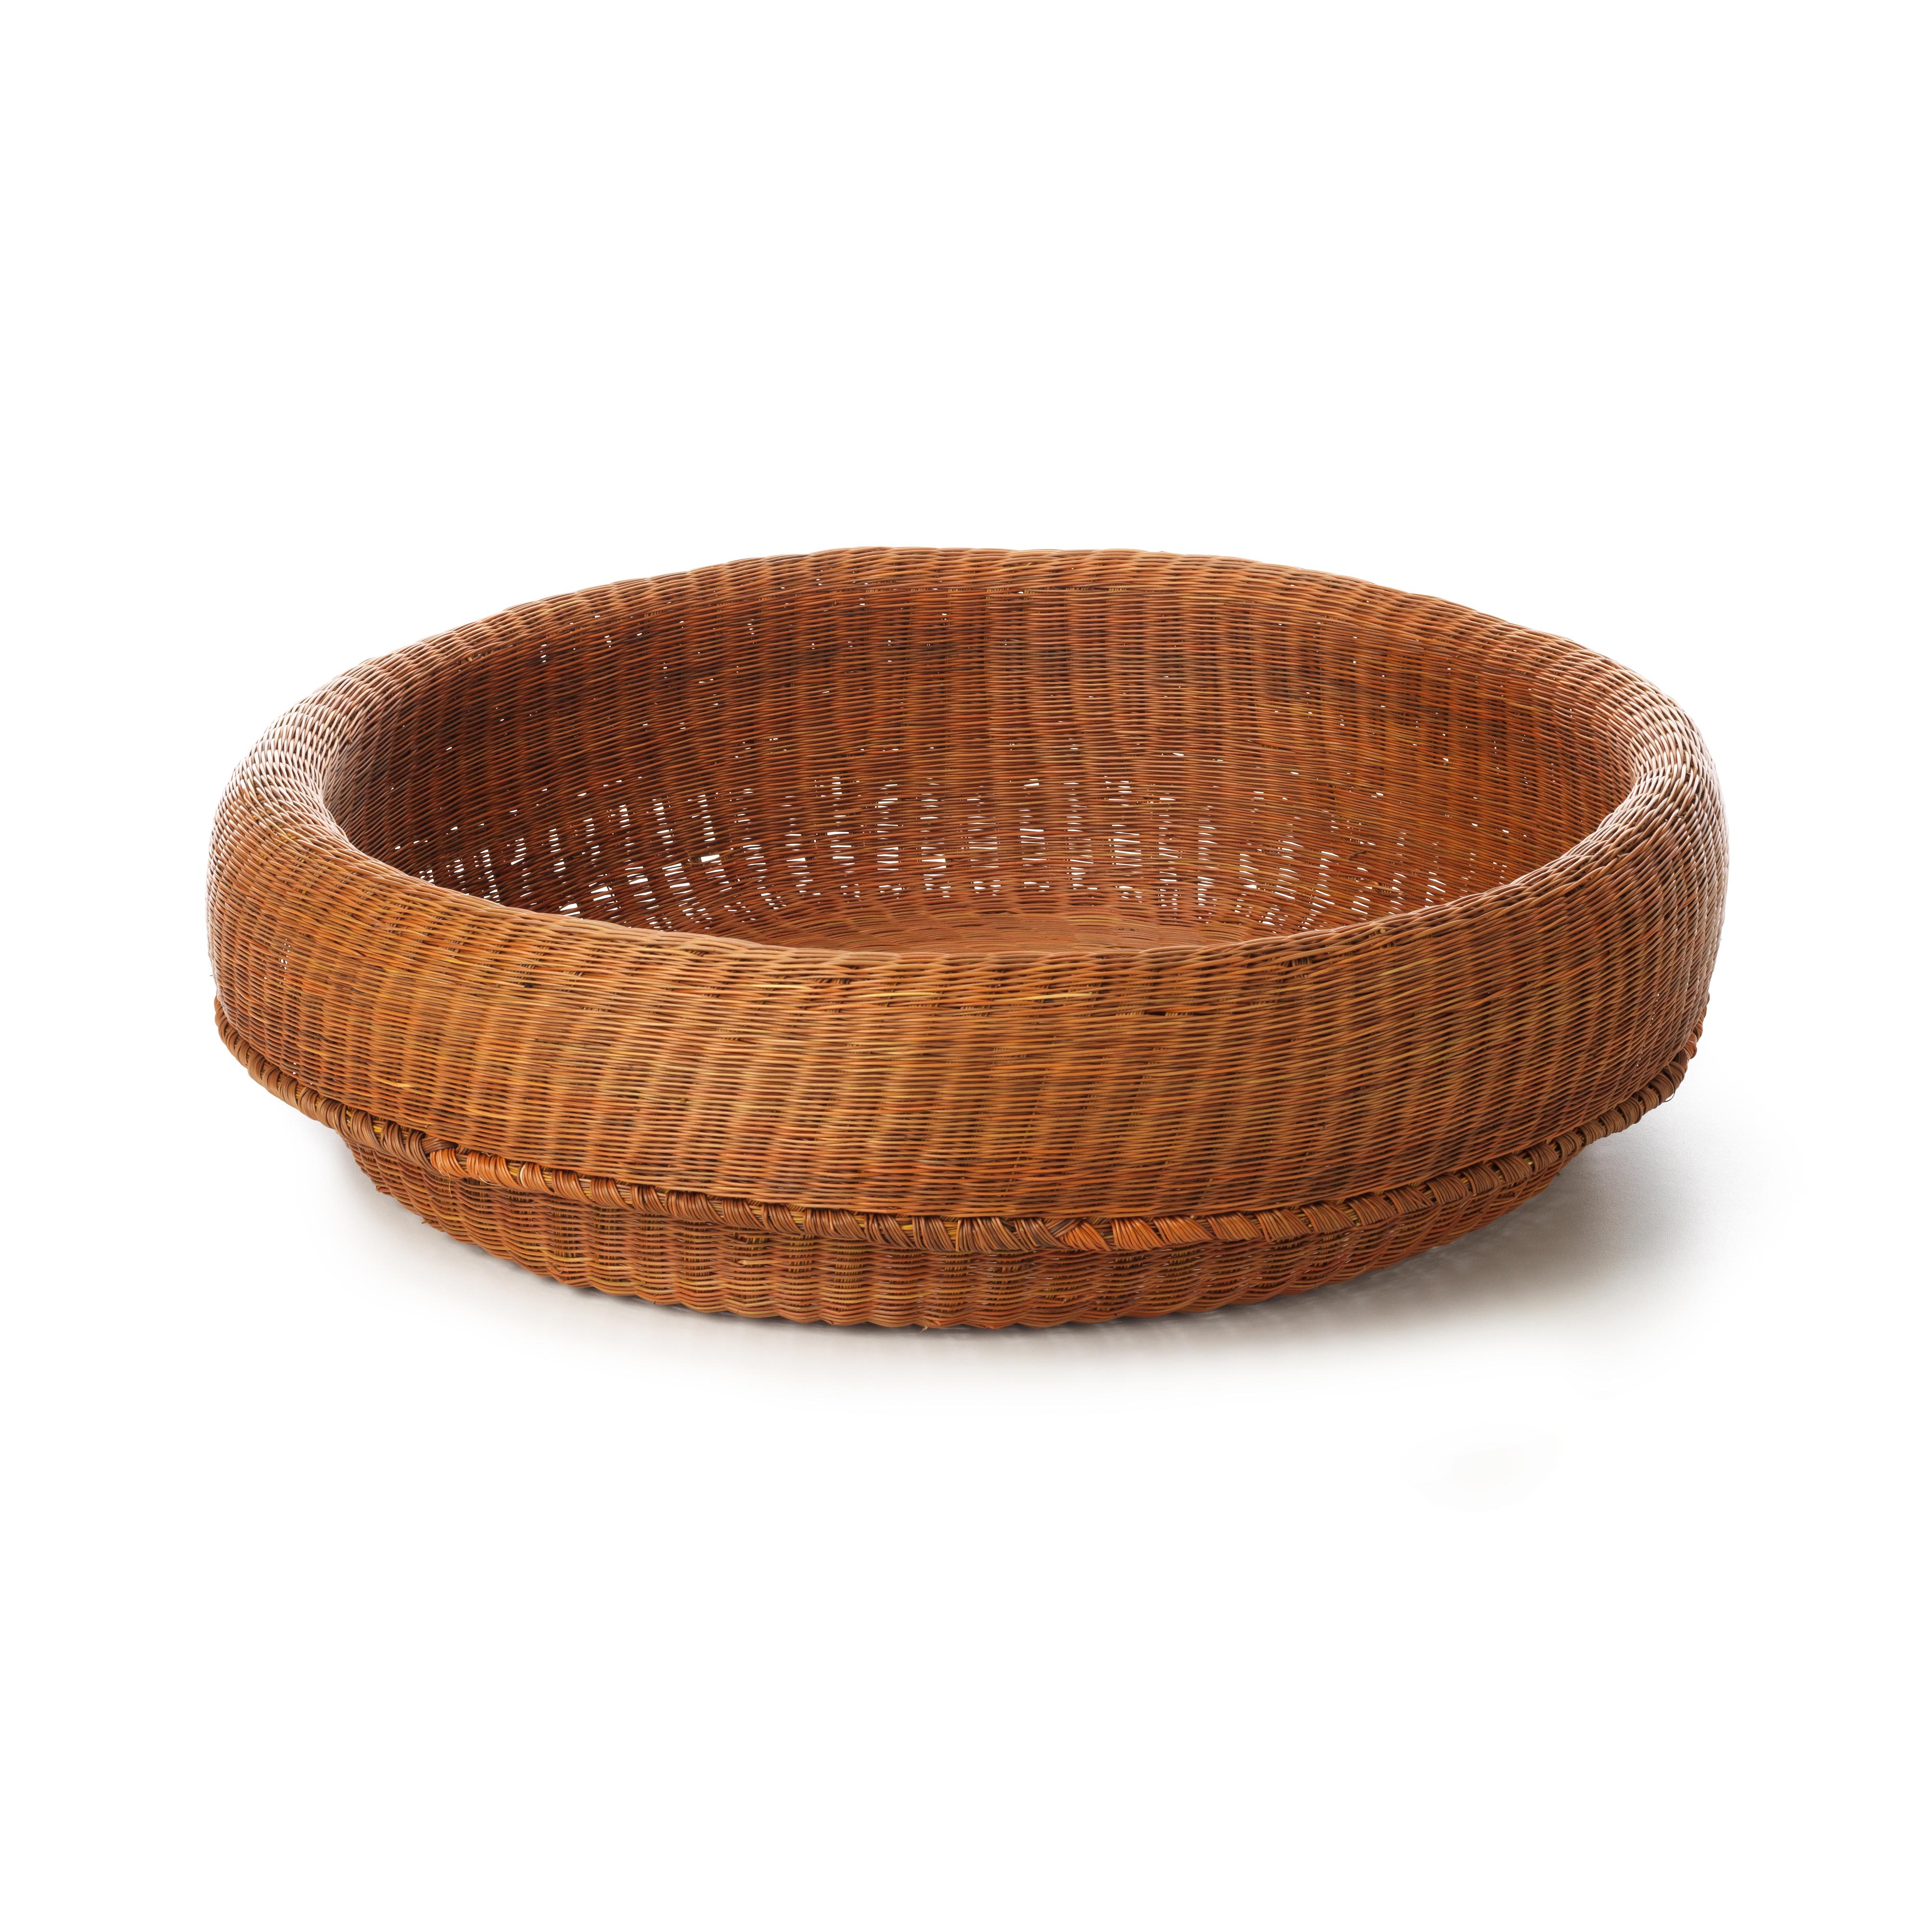 Fibra medium basket by Sebastian Herkner
Materials: 100% esparto grass. 
Technique: Hand-woven in Colombia. 
Dimensions: Diameter 47 cm x width 34 x height 10 cm 
Available in colors: natural, red, black, and, cobre. And other sizes. 

The